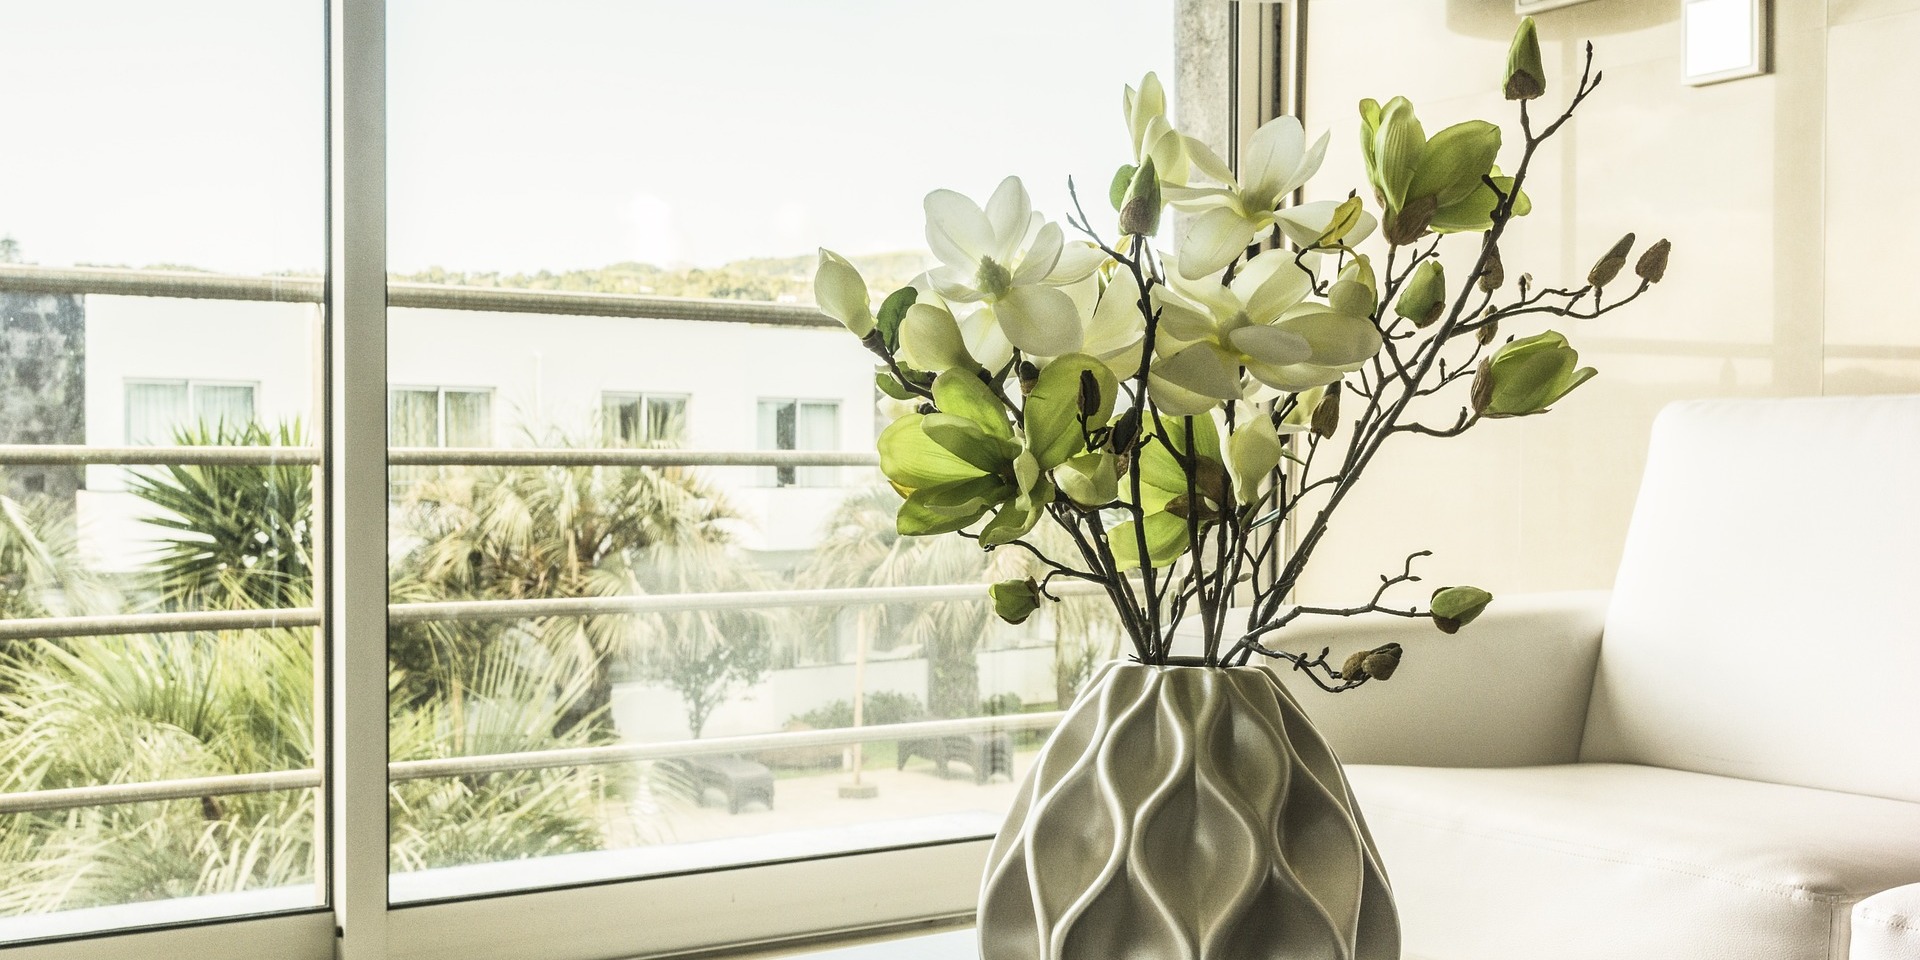 can house plants improve wellbeing and mood